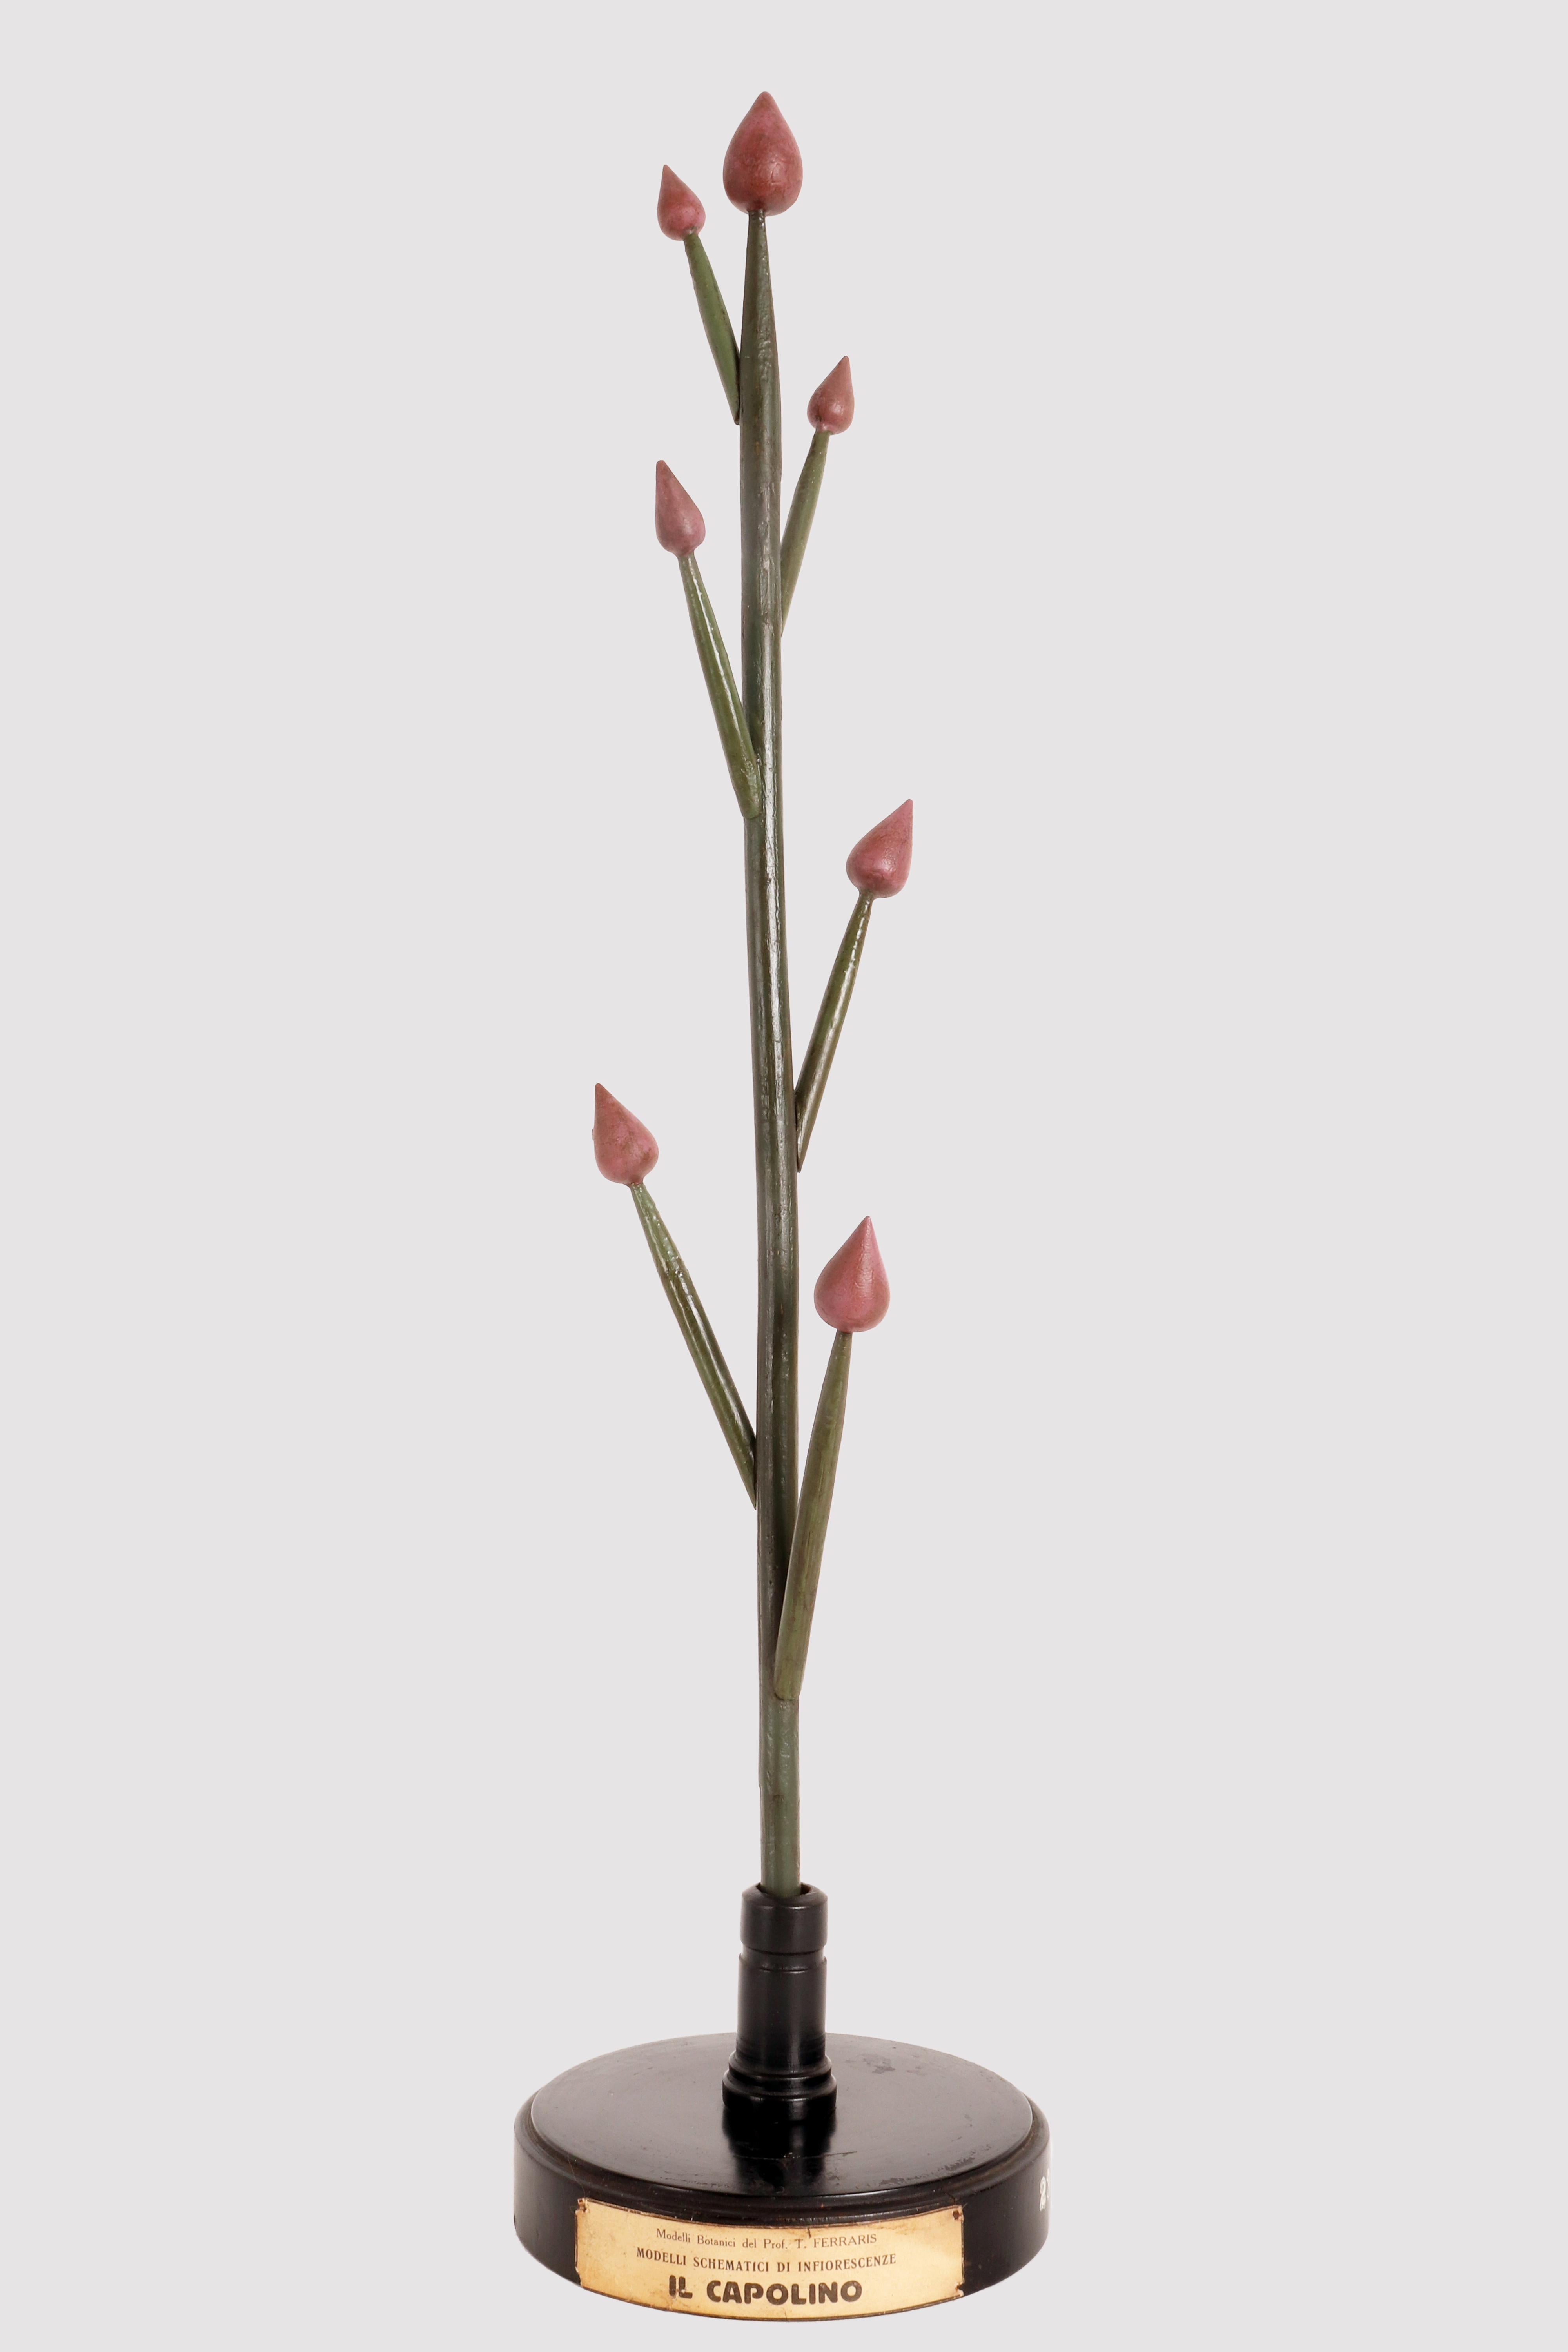 A rare botanical schematic model by Prof. T. Ferraris, didactic use, of a type of inflorescence specimen, the Simple Flower Head, made with hand-painted plaster colored gems, wooden branches and painted papier-mâché components. Mounted on a round